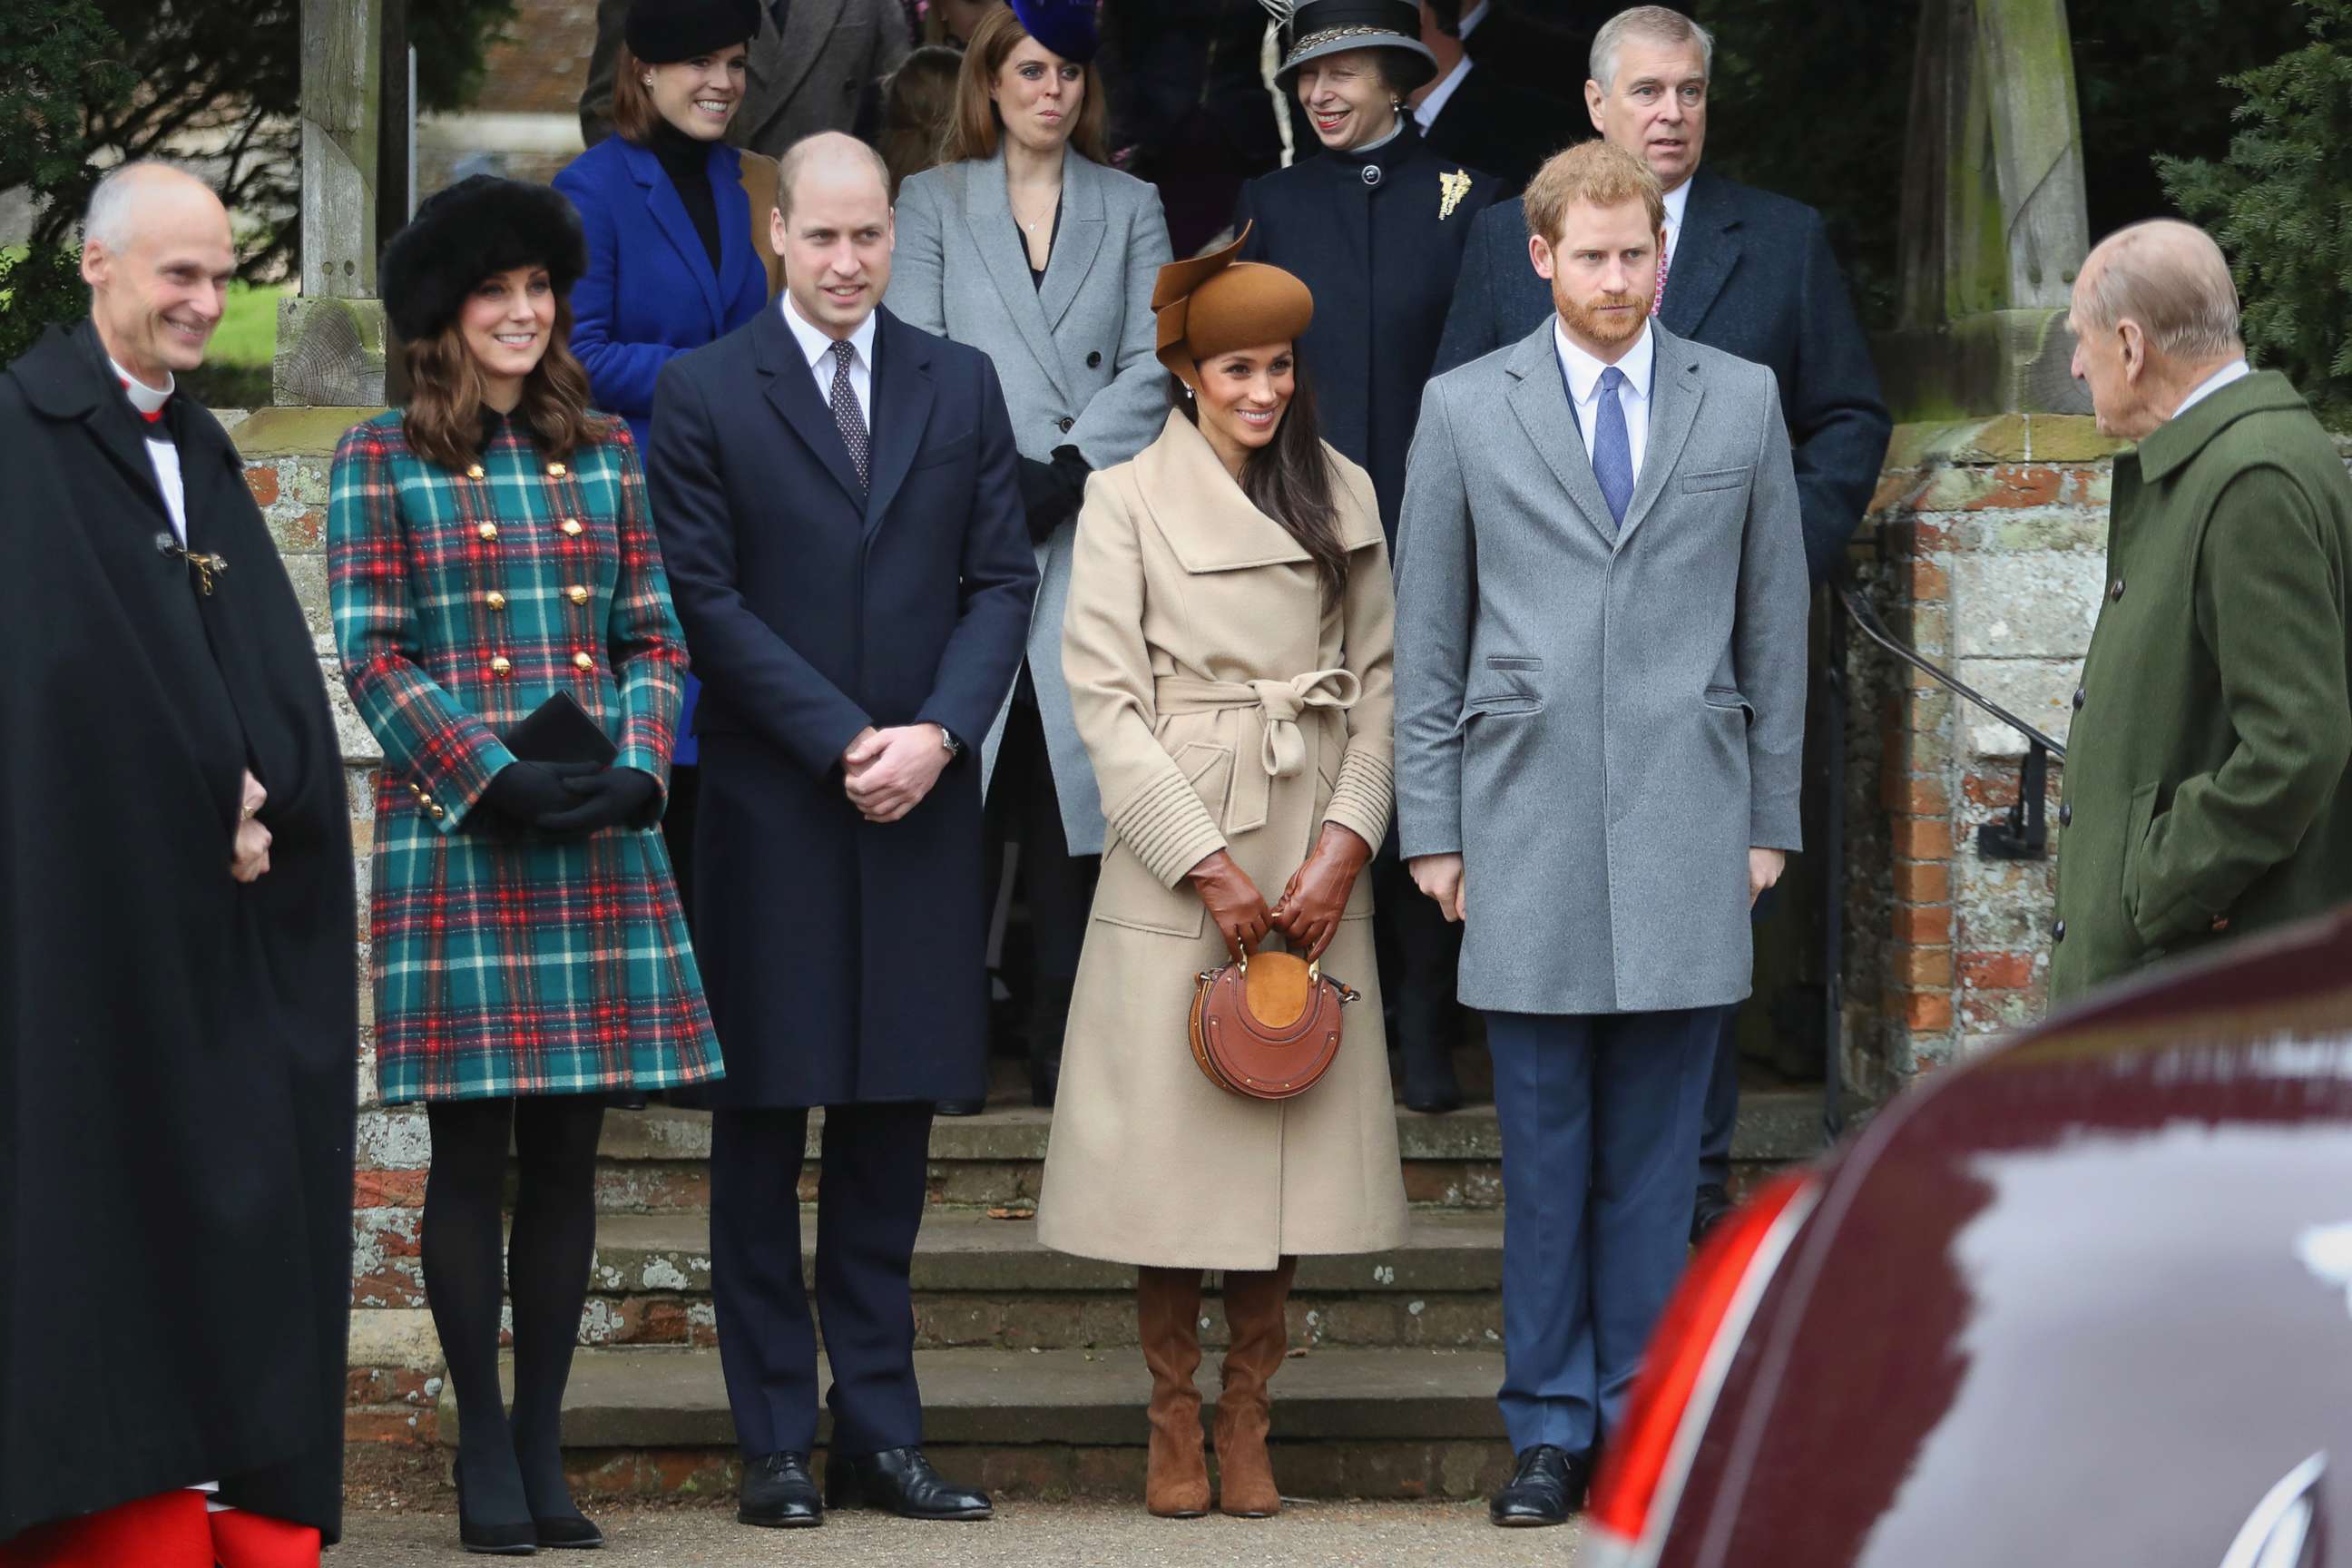 PHOTO: From left, Catherine, Duchess of Cambridge, Prince William, Meghan Markle, Prince Harry, and Prince Philip attend Christmas Day Church service at Church of St Mary Magdalene on Dec. 25, 2017 in King's Lynn, England.